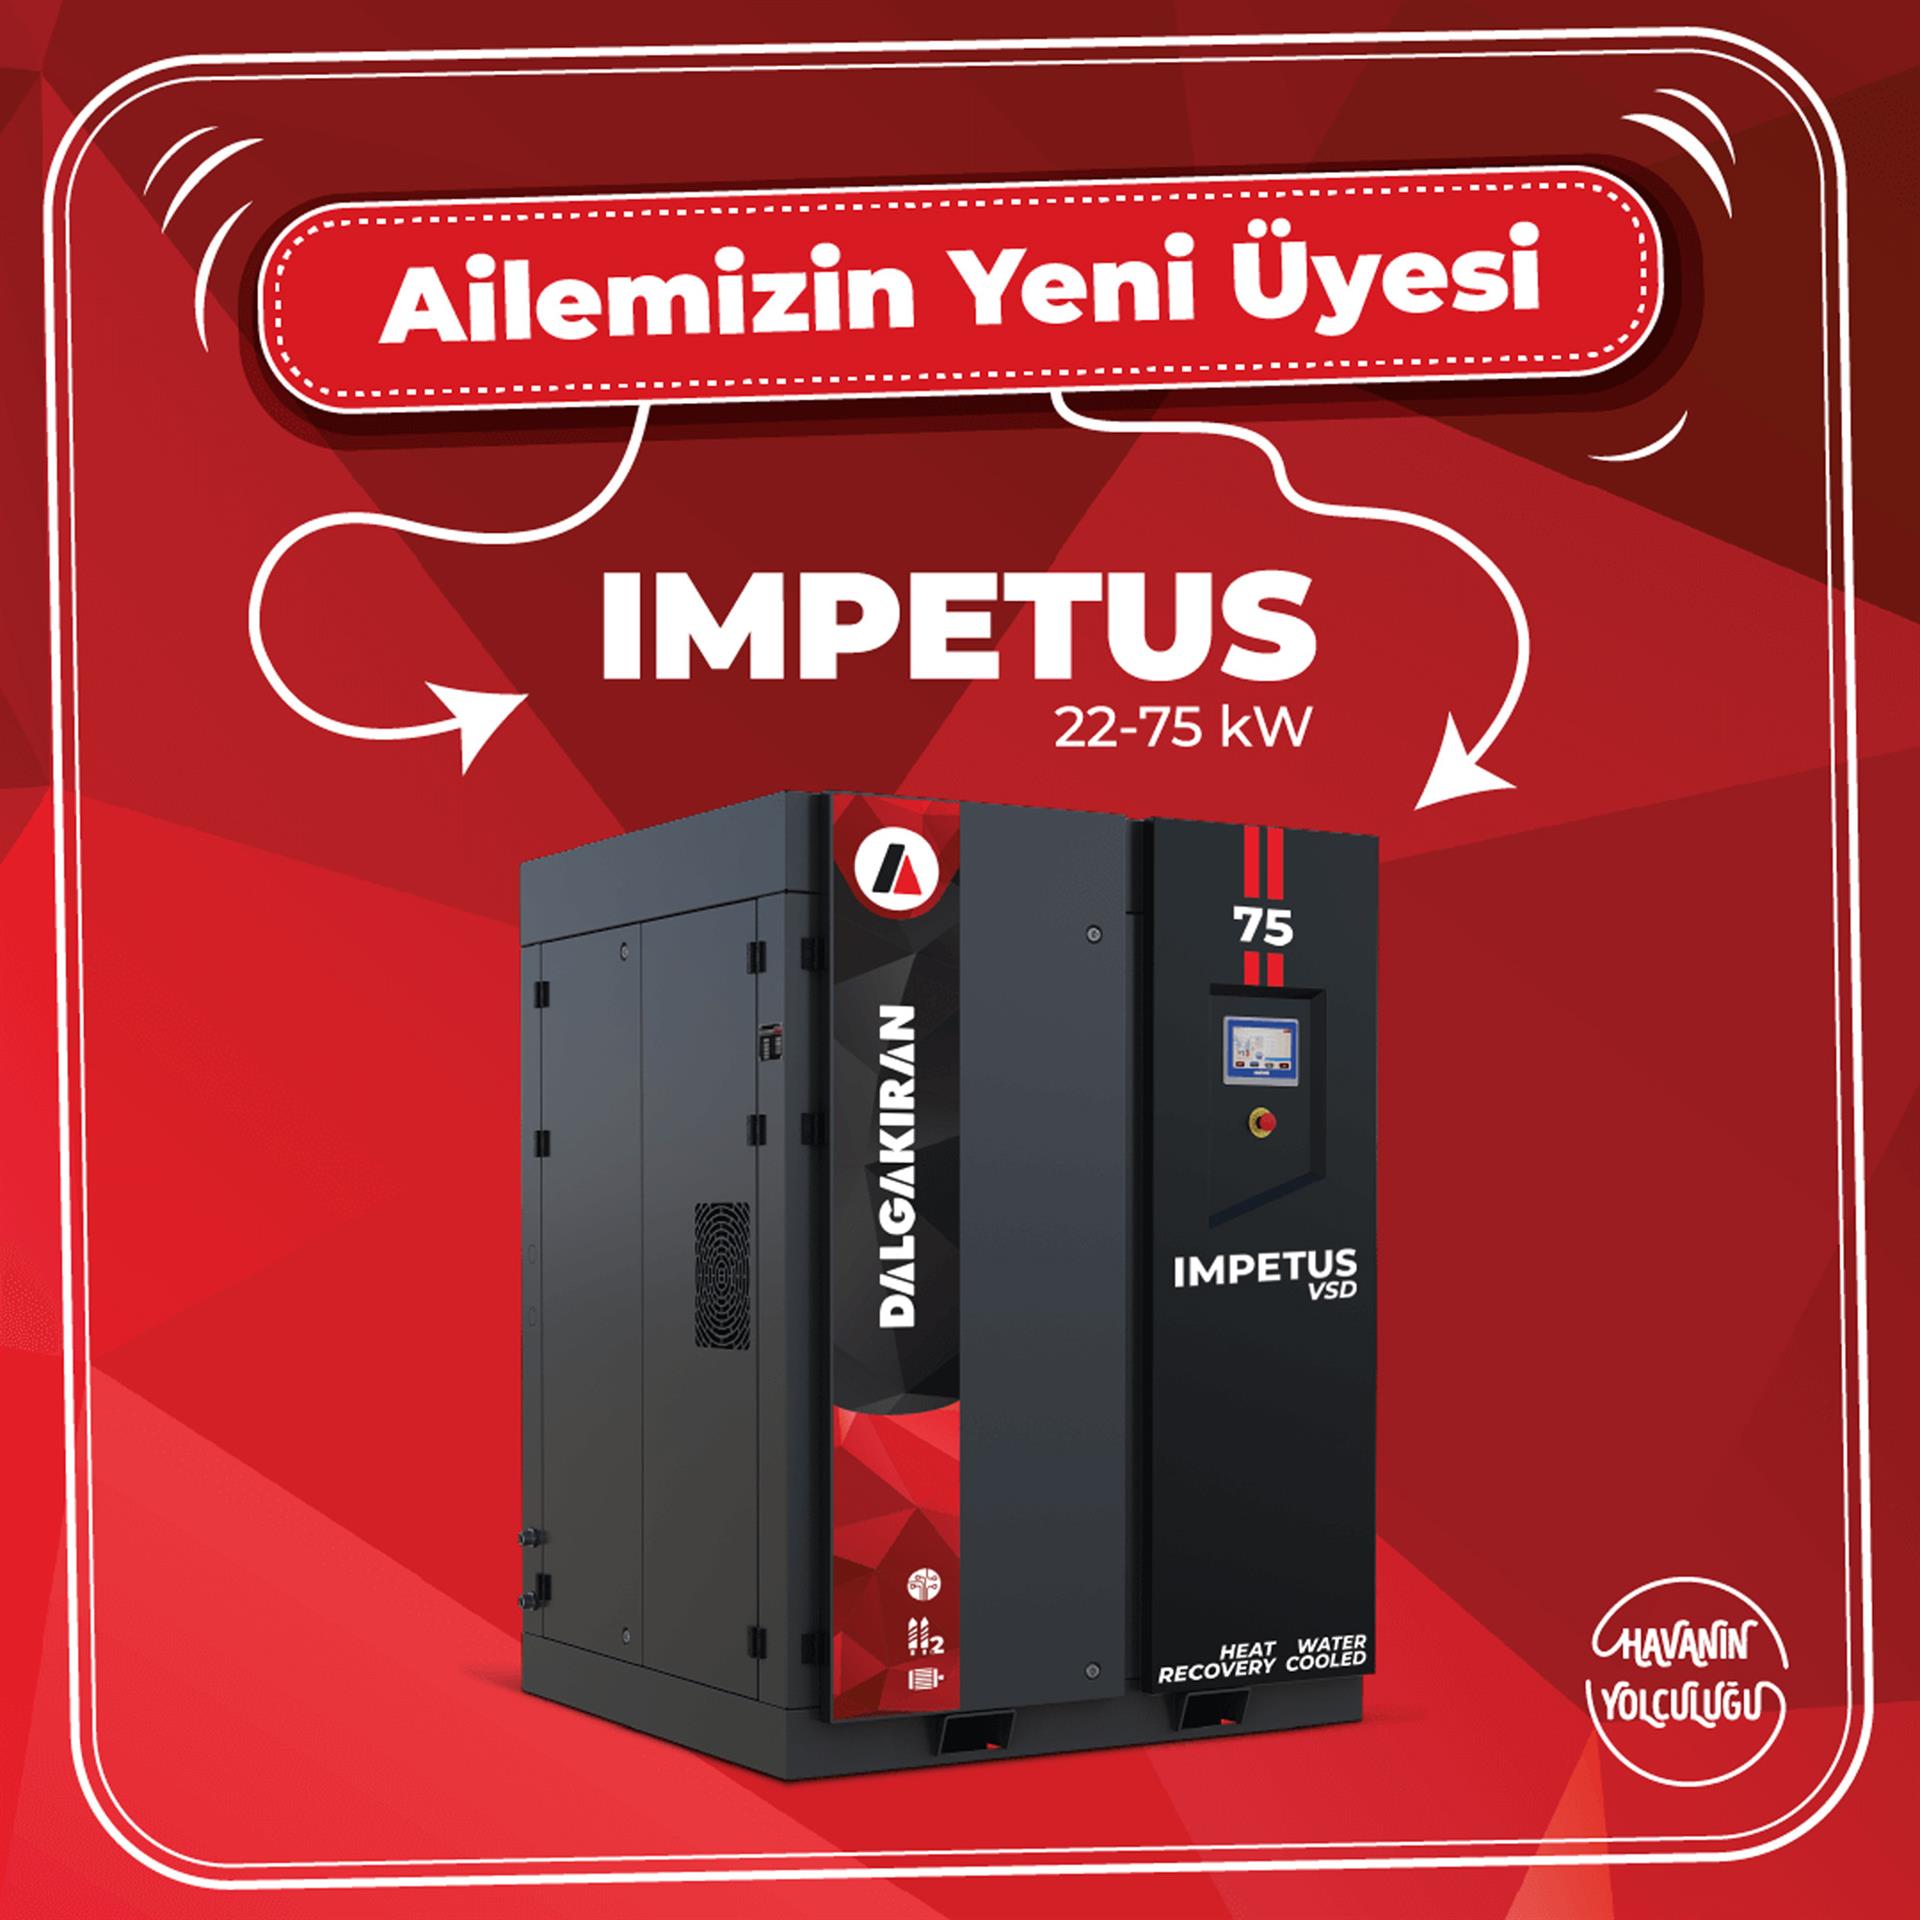 Our New Model: IMPETUS 22-75 kW